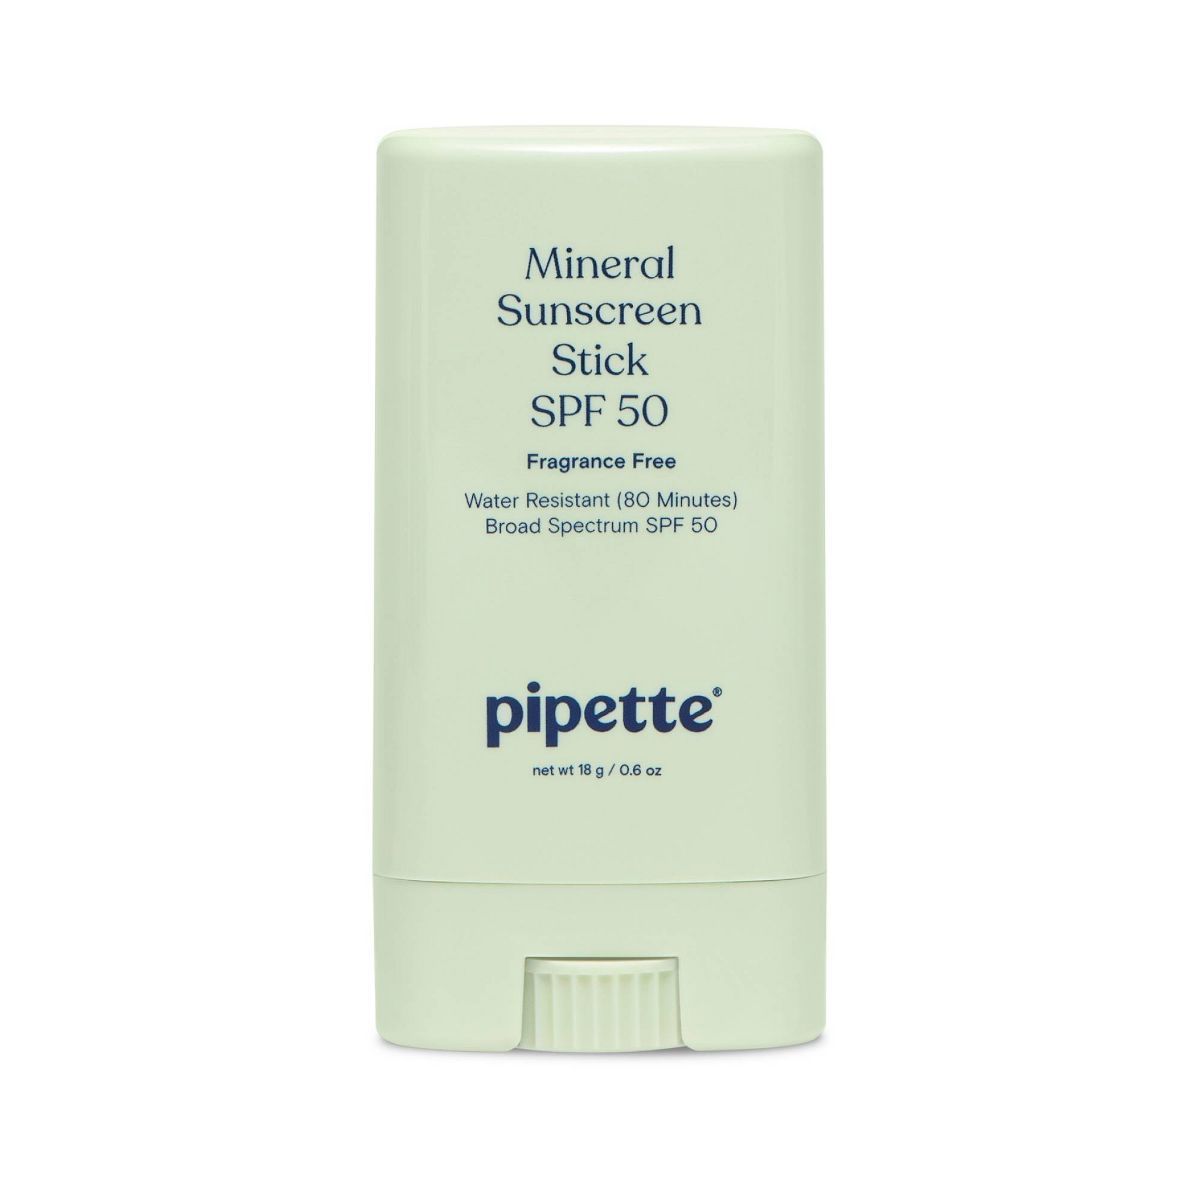 Pipette Mineral Sunscreen Stick SPF 50 - 0.6oz | Target